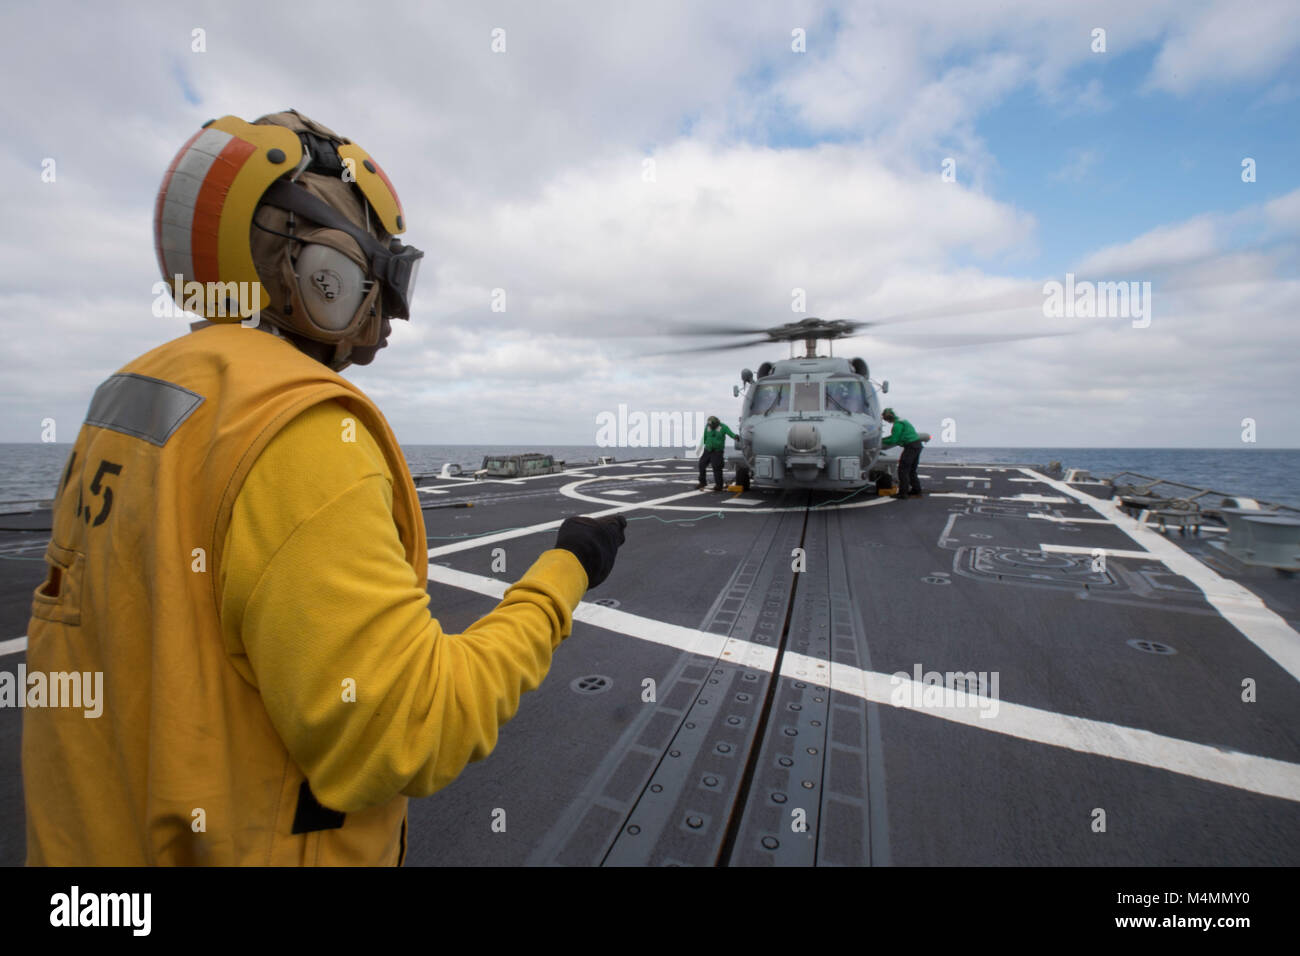 180210-N-SF984-0038 PACIFIC OCEAN (Feb. 10, 2018) Boatswain's Mate 3rd Class Aaliyah Terrell of Fort Worth, Texas, assigned to Arleigh Burke-class guided-missile destroyer USS Dewey (DDG 105), signals to an MH-60 Seahawk during flight operations. Dewey departed Naval Base San Diego to conduct operations in the Indo-Pacific Region, Feb. 6. Dewey, along with USS Sterett (DDG 104), will also support the Wasp Expeditionary Strike Group deployment in order to advance U.S. Pacific Fleet's Up-Gunned ESG concept and will train with forward-deployed amphibious ships across all mission areas.  (U.S. Nav Stock Photo